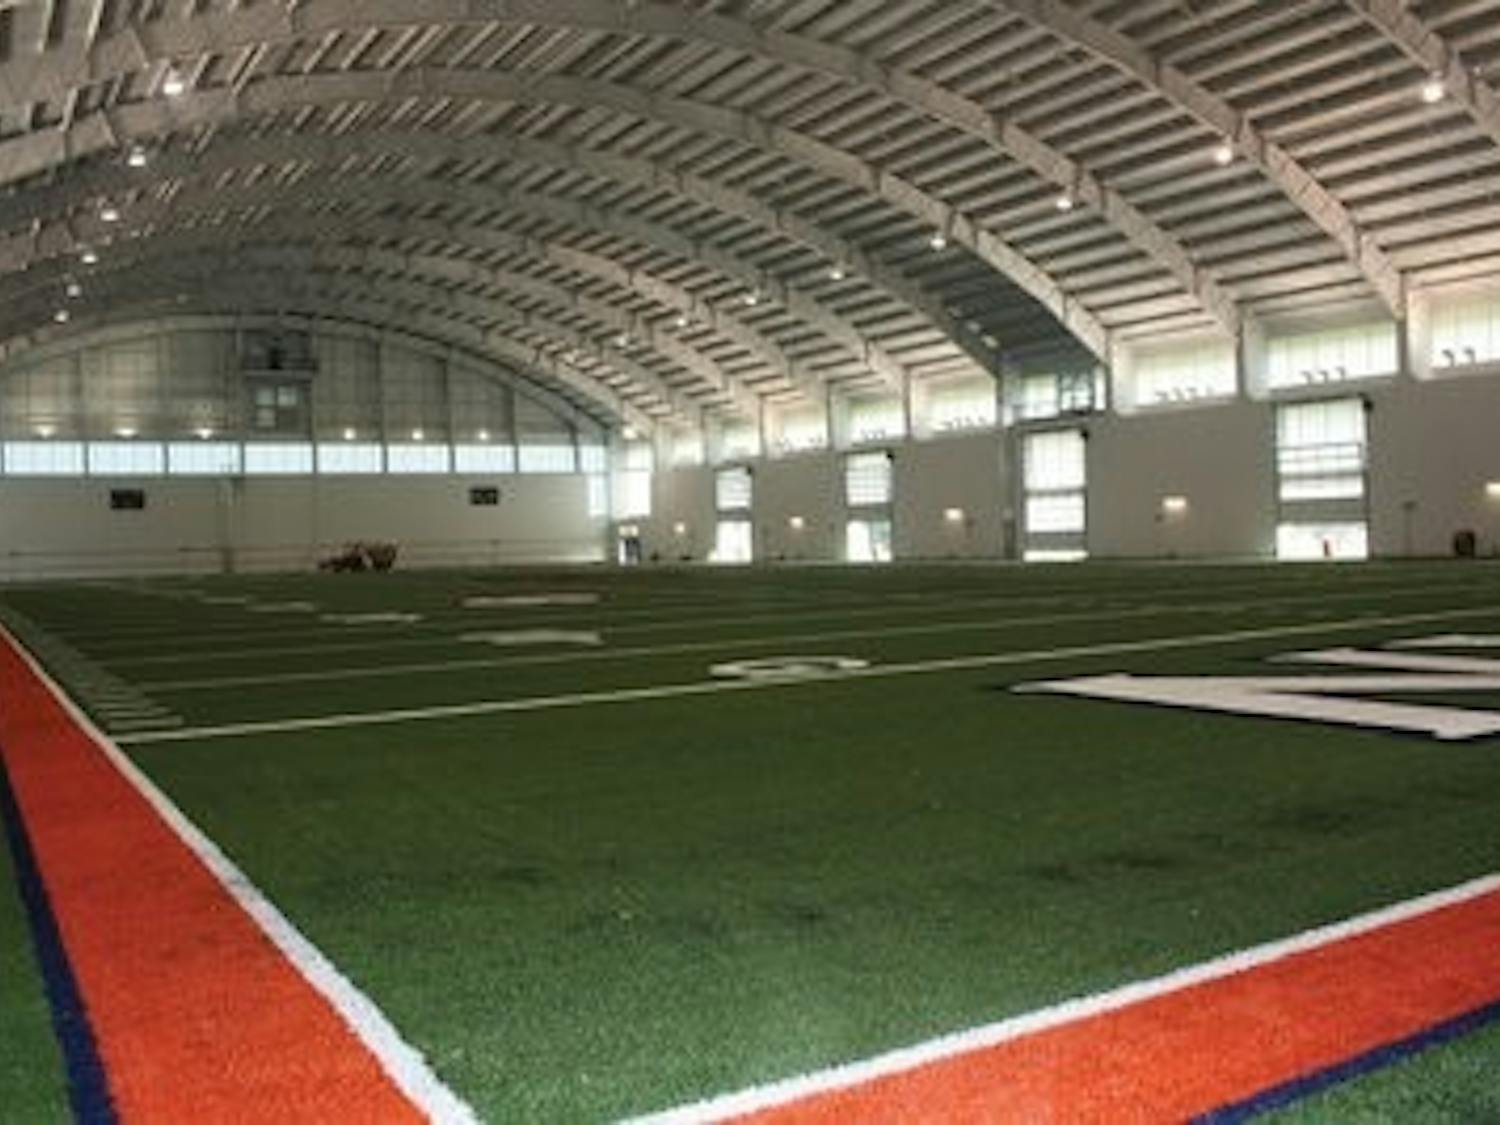 The indoor practice facililty is scheduled to be finished July 29. The football players would be allowed to be in the facility on the July 30, but won't report to practice until a few days later. (Nicole Singleton / Sports Editor)